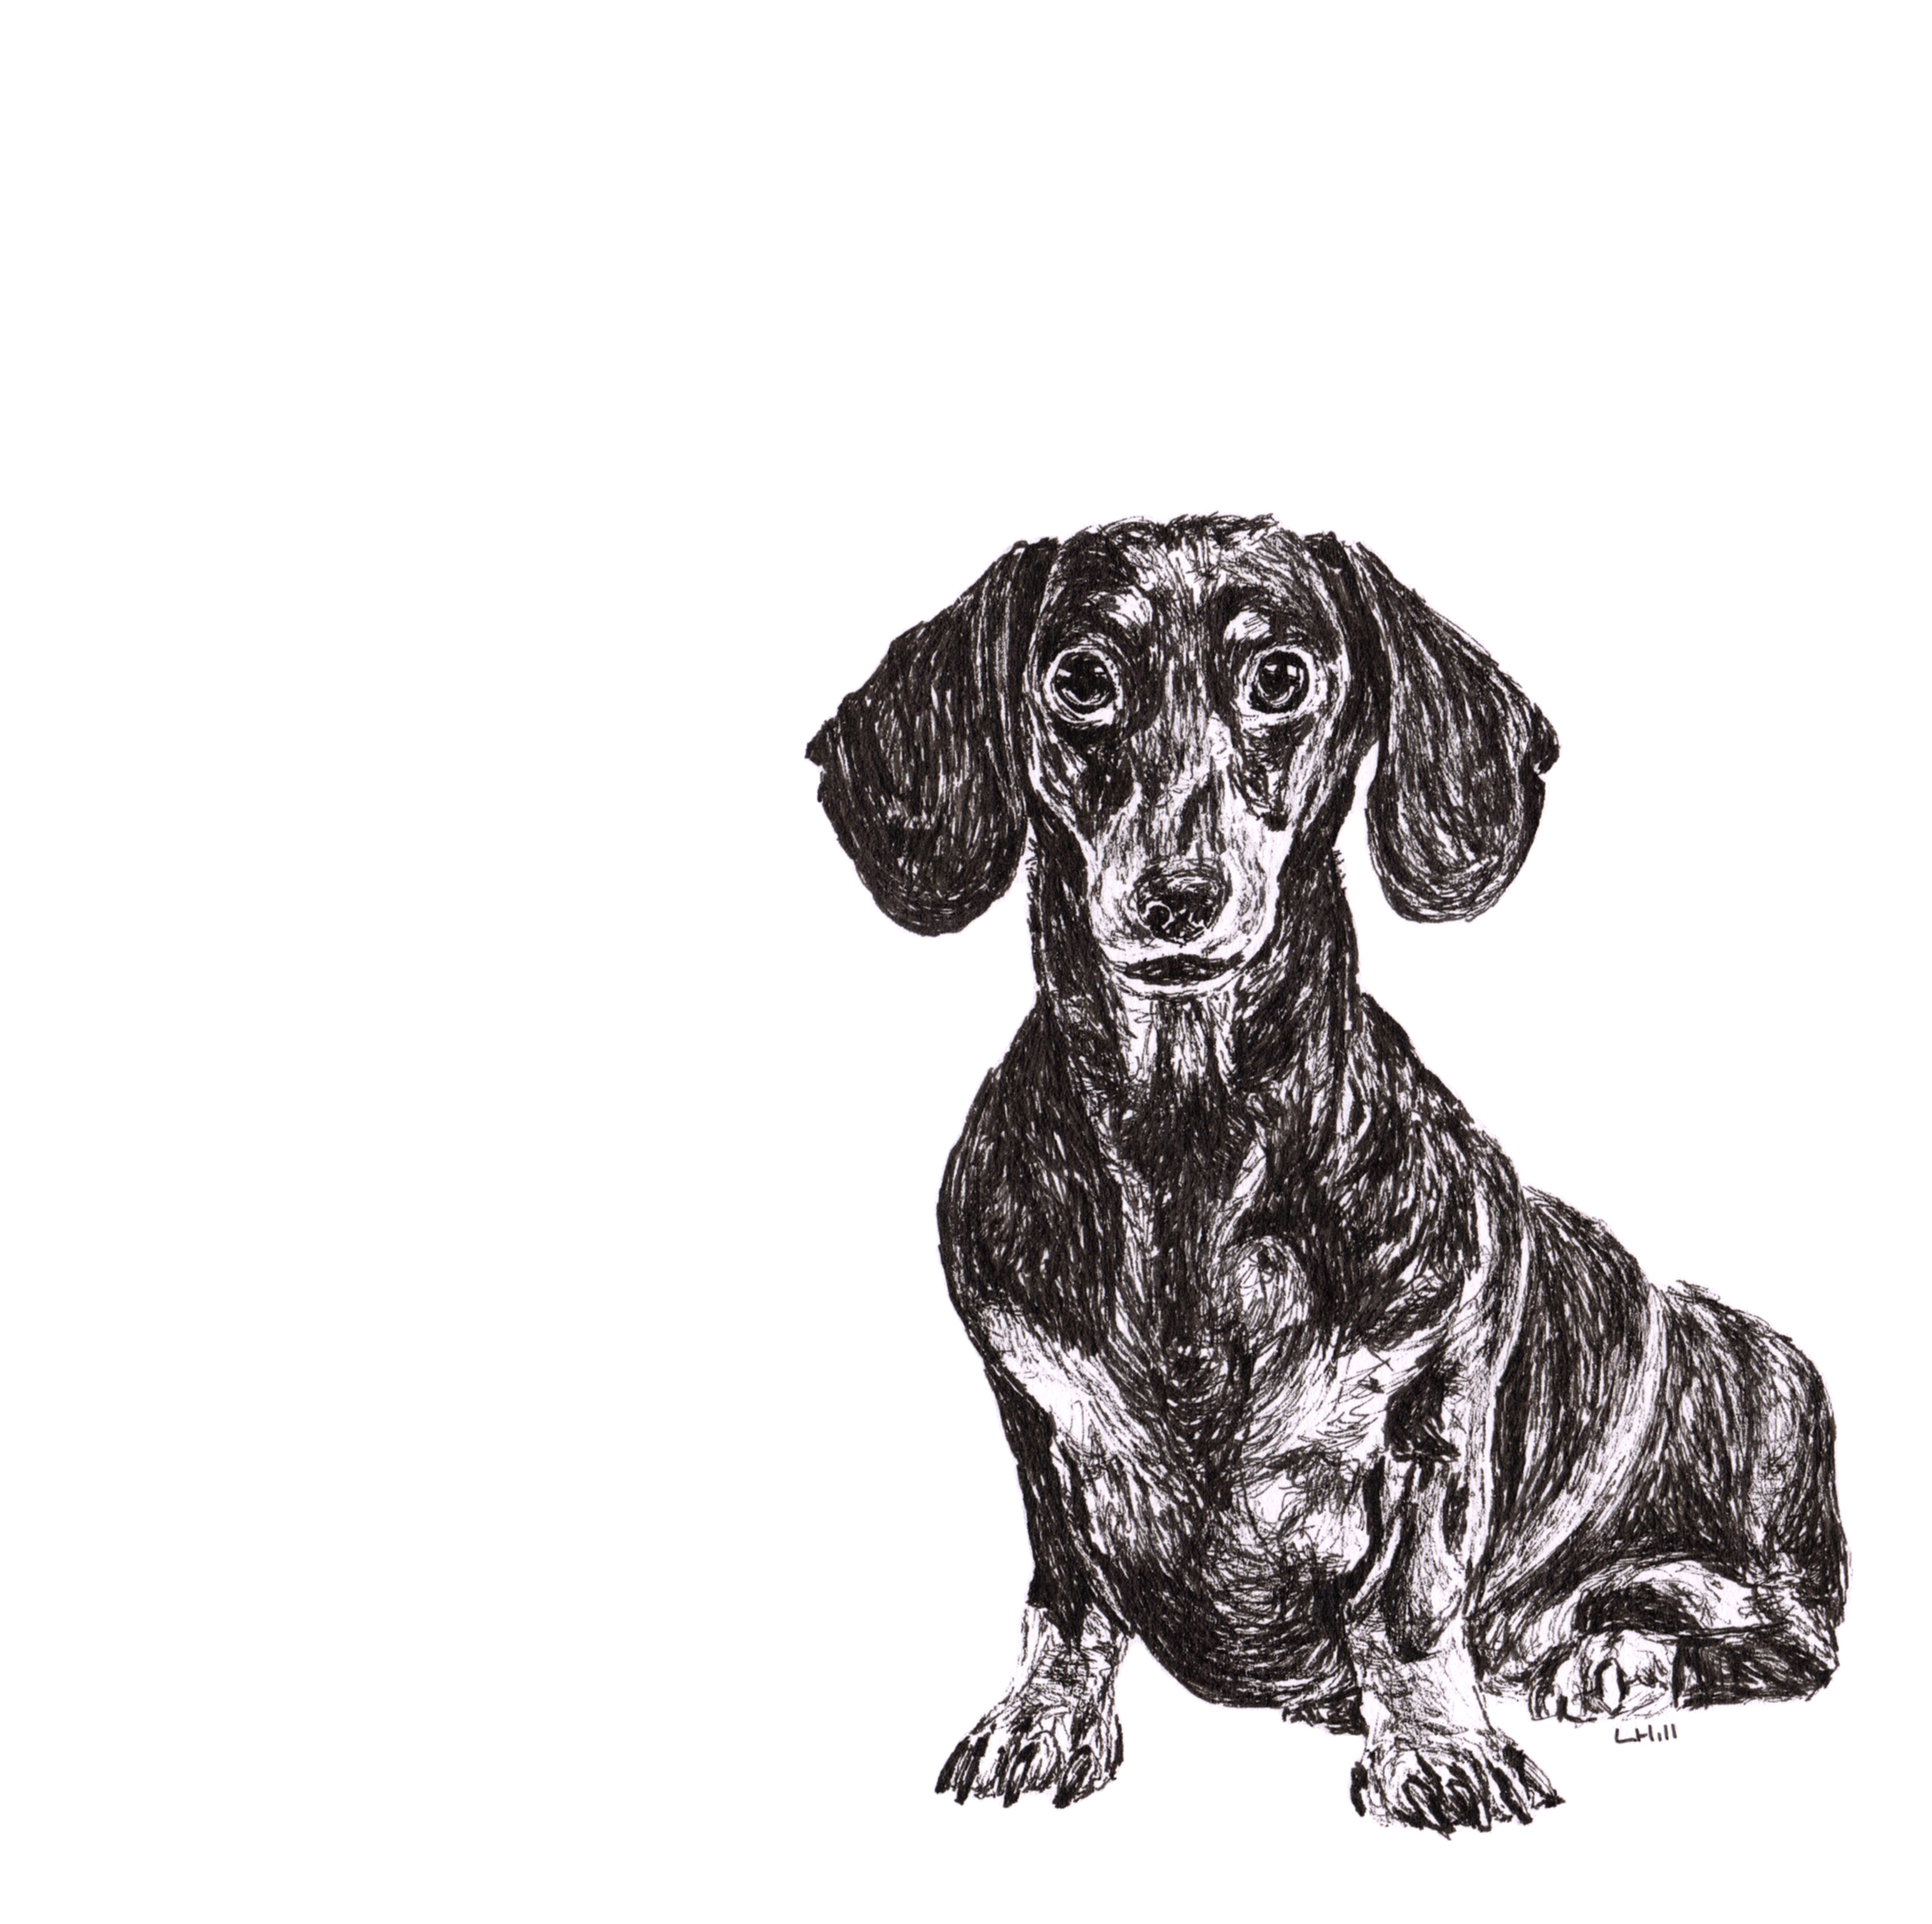 Dachshund pen and ink illustration by Louisa Hill